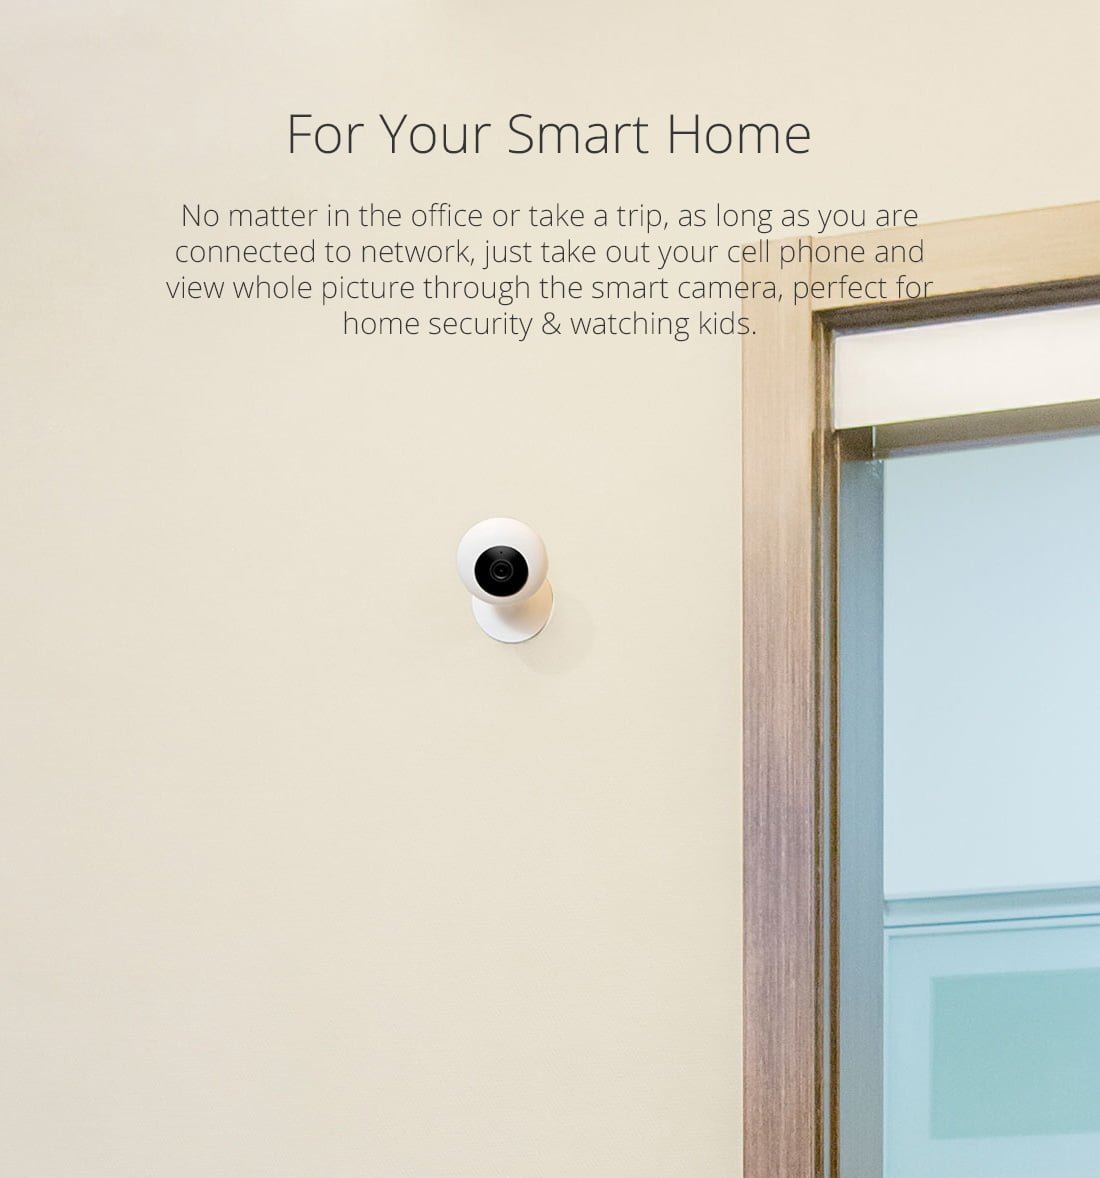 No matter in the office or take a trip, as long as you are connected to network, just take out your cell phone and view whole picture through the smart camera, perfect for home security & watching kids.